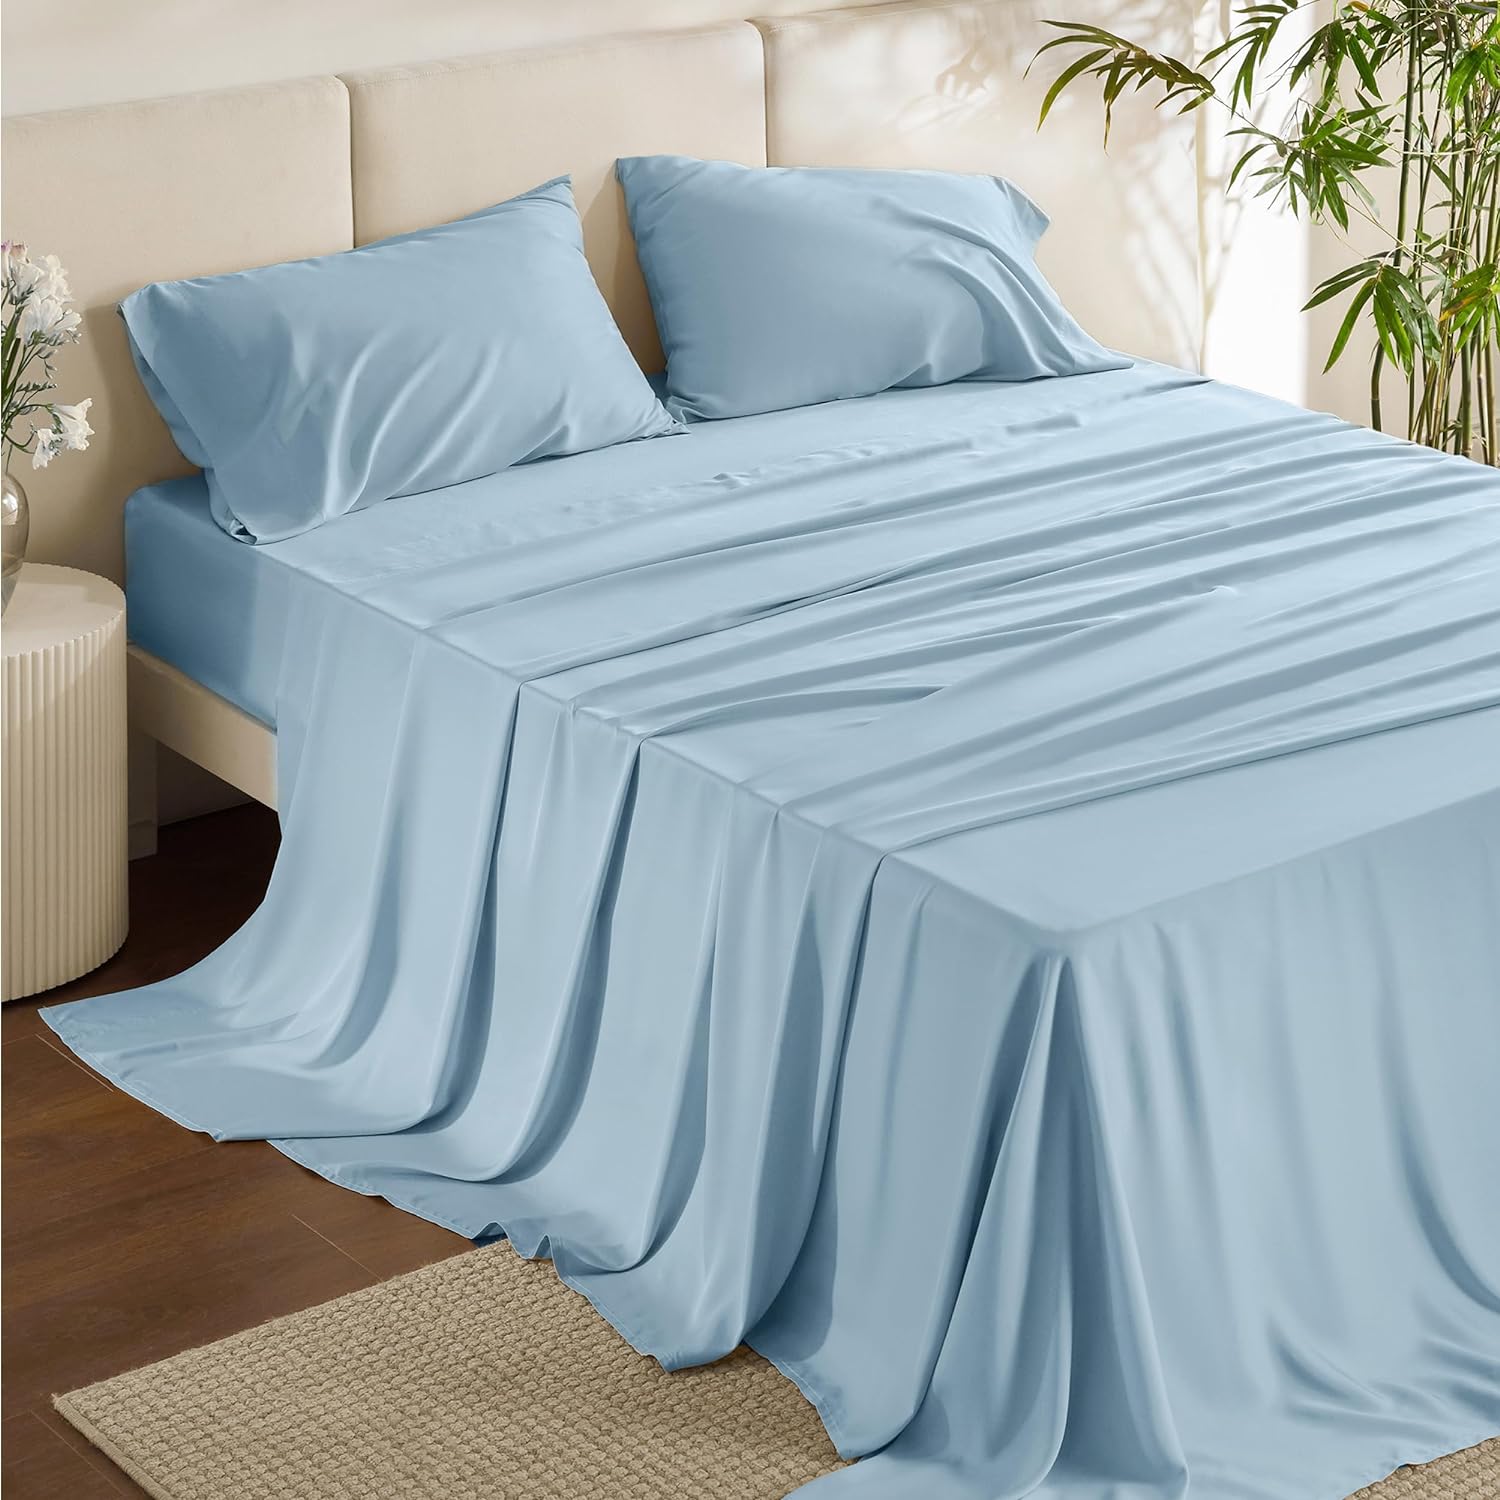 Hotel Luxury Silky Bedding Sheets And Pillowcases Sets